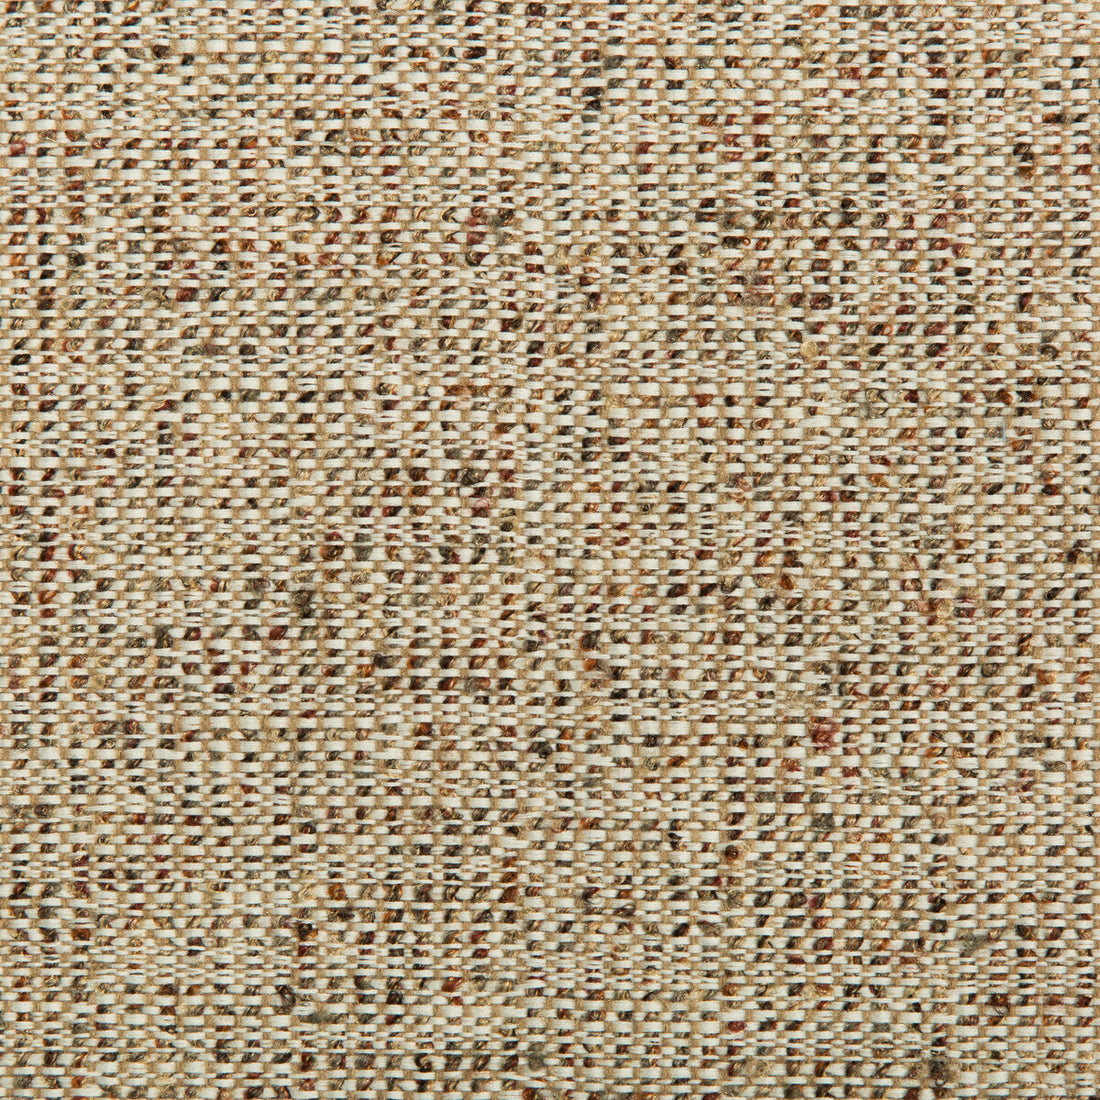 Kravet Smart fabric in 34616-916 color - pattern 34616.916.0 - by Kravet Smart in the Performance Crypton Home collection